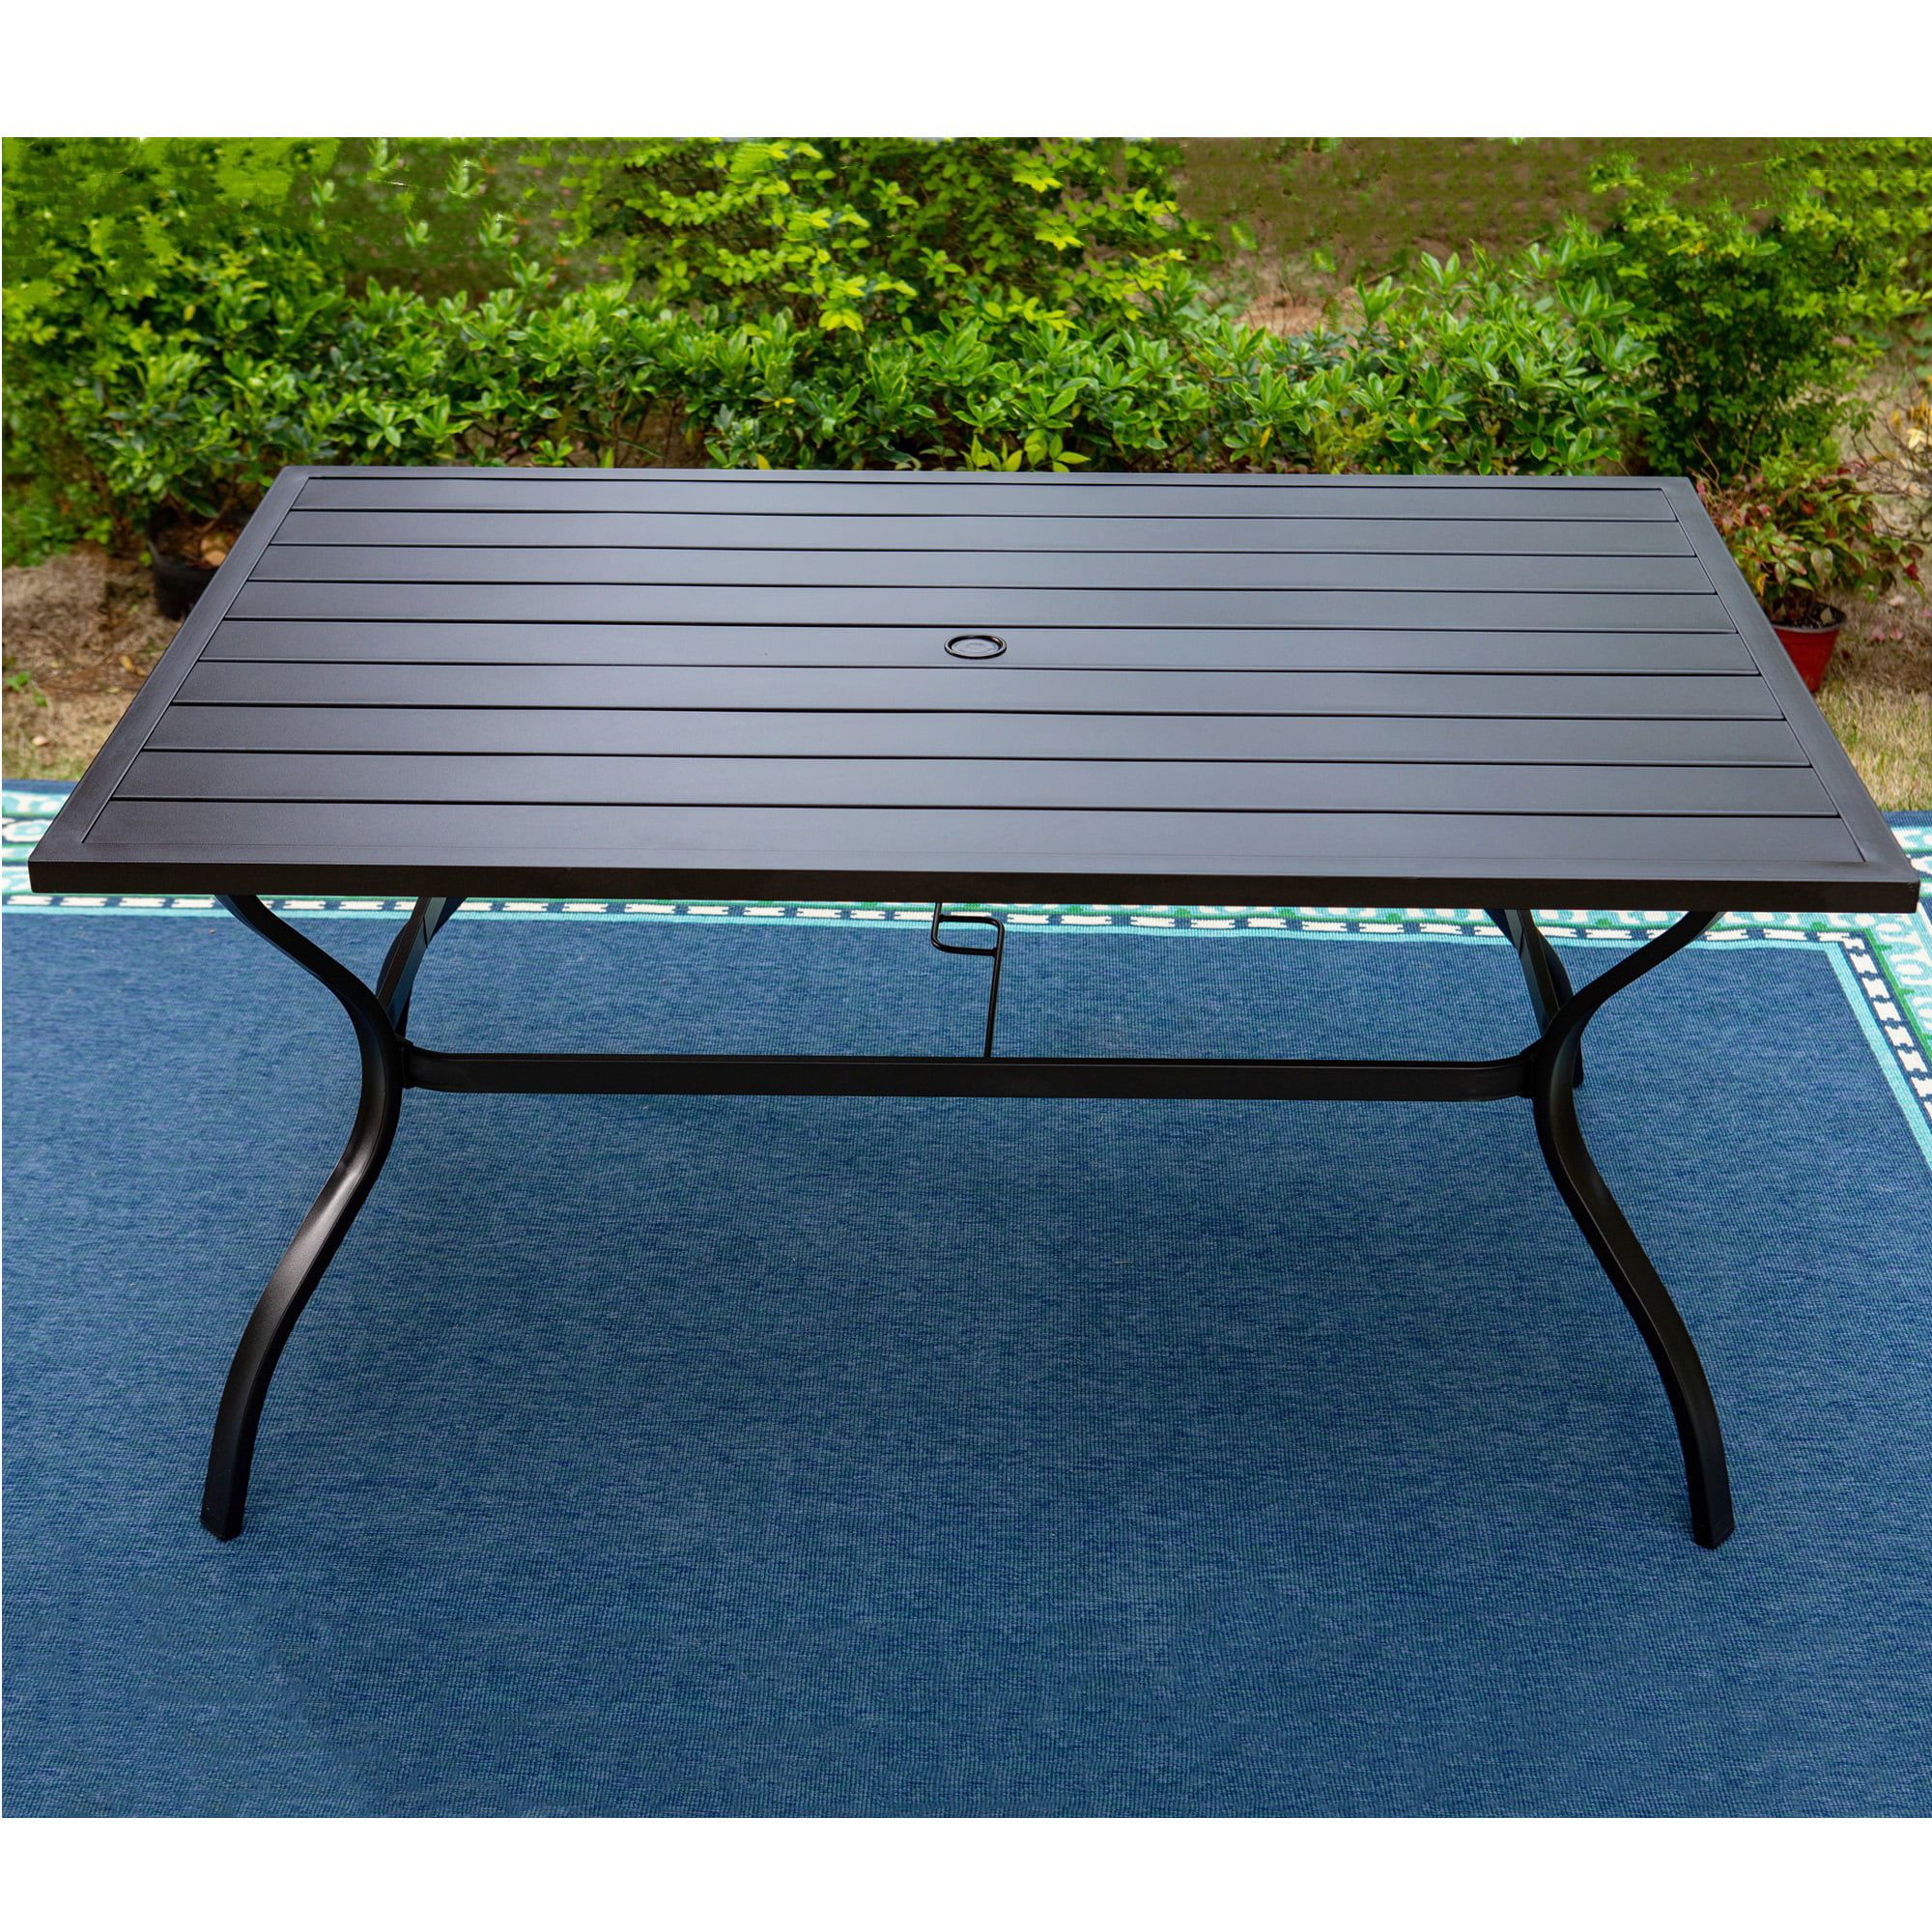 Mf Studio 60" * 38" Outdoor Dining Table 6 Person Powder Coated Metal Table,  Black – Walmart In Metal Table Patio Furniture (View 6 of 15)